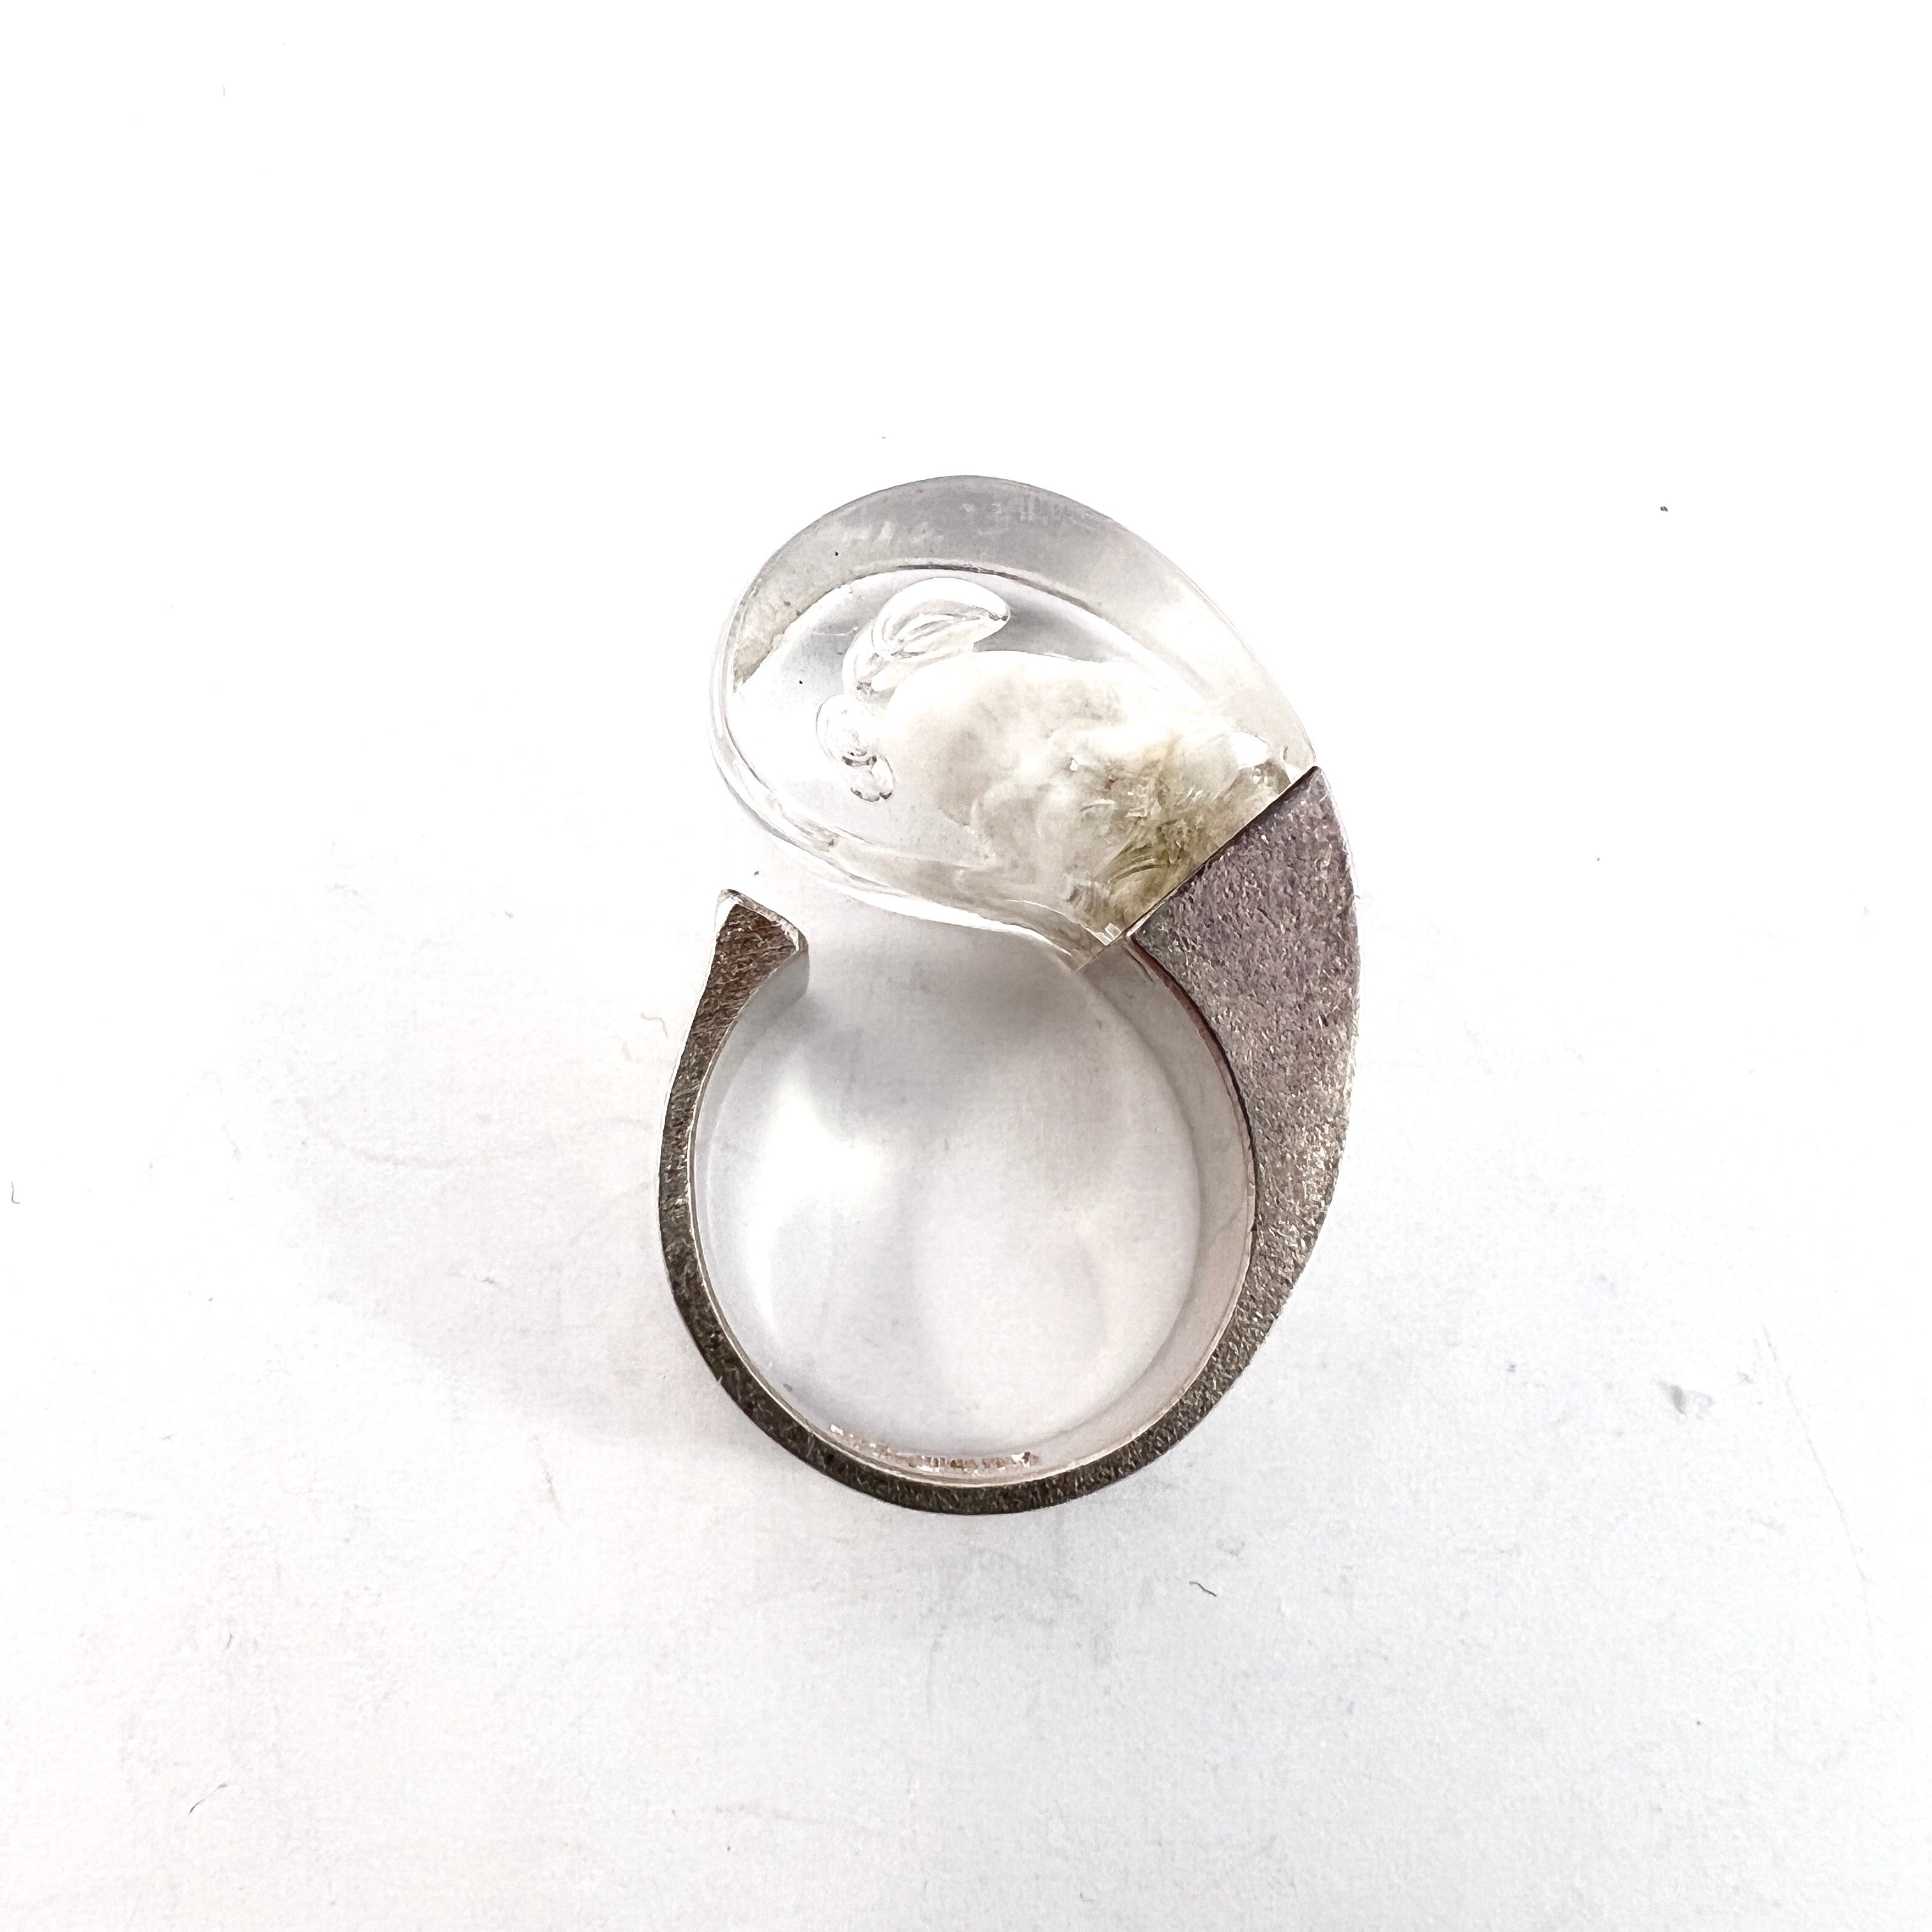 Bjorn Weckstrom for Lapponia, Finland 1972. Vintage Sterling Acrylic Ring. Design Microns.